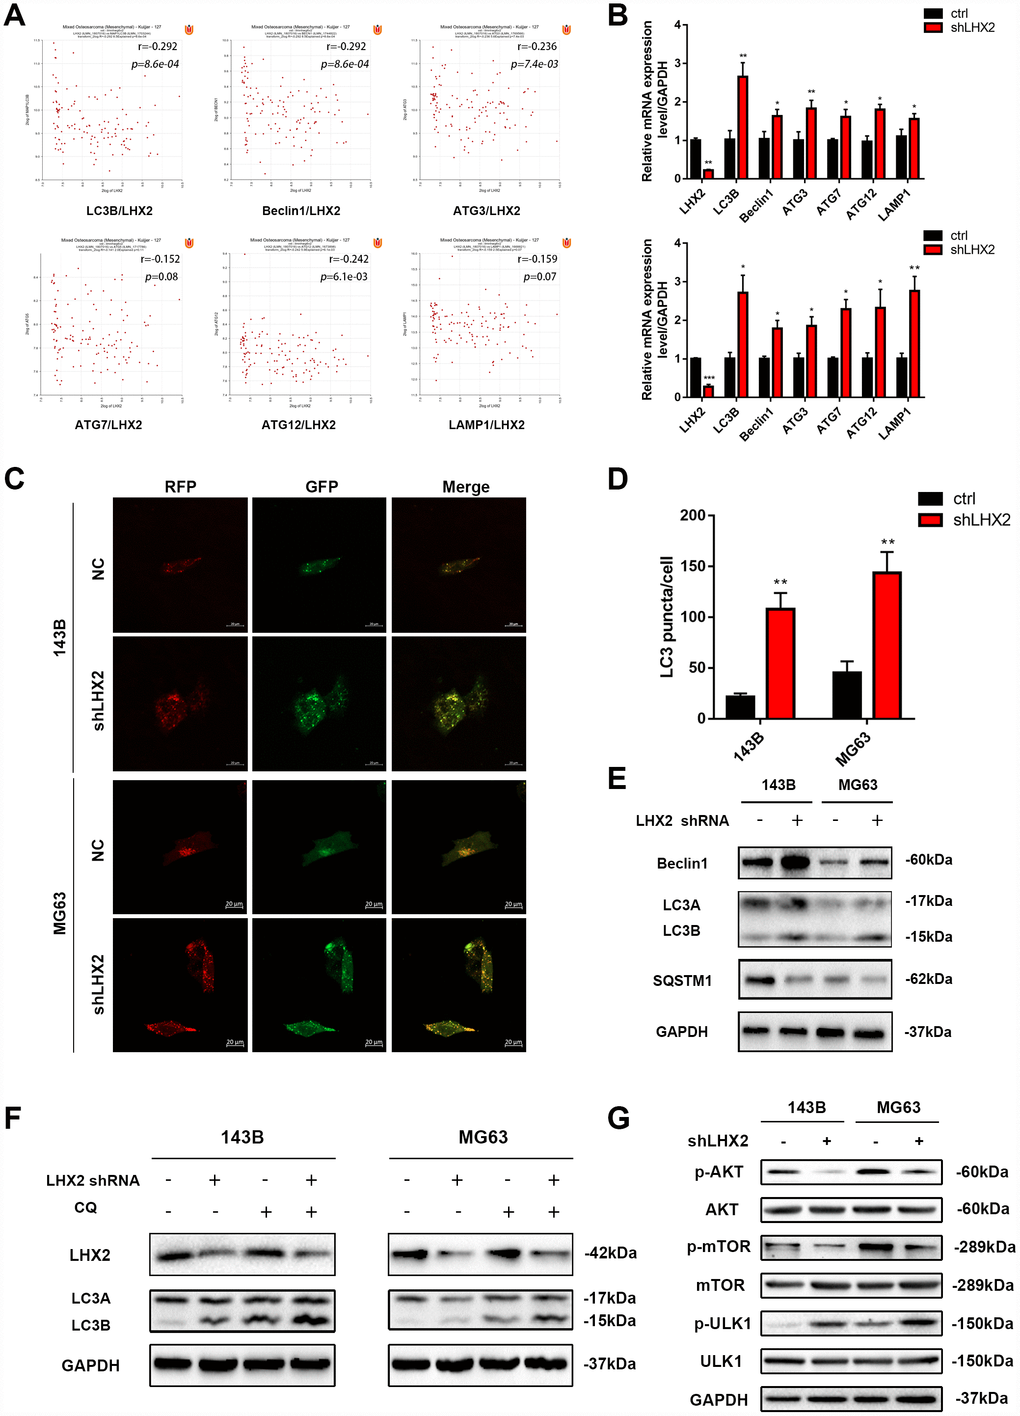 LHX2 knockdown enhances autophagy and inhibits mTOR signaling in vitro. (A) Pearson correlation analysis between LHX2 and autophagy-related genes in 127 OS patients. (B) qRT-PCR analysis of autophagy-related gene expression in LHX2 knockdown cells. *P PC) Representative confocal images of LC3 in lv-GFP-RFP-LC3–infected 143B and MG63 cells. Scale bar: 20 μm (D) LC3 puncta in each cell were counted under 100× magnification. **PE) Autophagy-related protein (LC3B, Beclin1, SQSTM1) levels in lv-control or lv-shLHX2-infected 143B and MG63 cells. (F) 143B and MG63 cells were treated with or without CQ (20 μM) for 12 h. LHX2 and LC3B proteins were detected by western blot. (G) Western blots of p-Akt (Ser473), Akt, p-mTOR (Ser2448), mTOR, p-ULK1 (Ser757), ULK1 in 143B and MG63 cells.